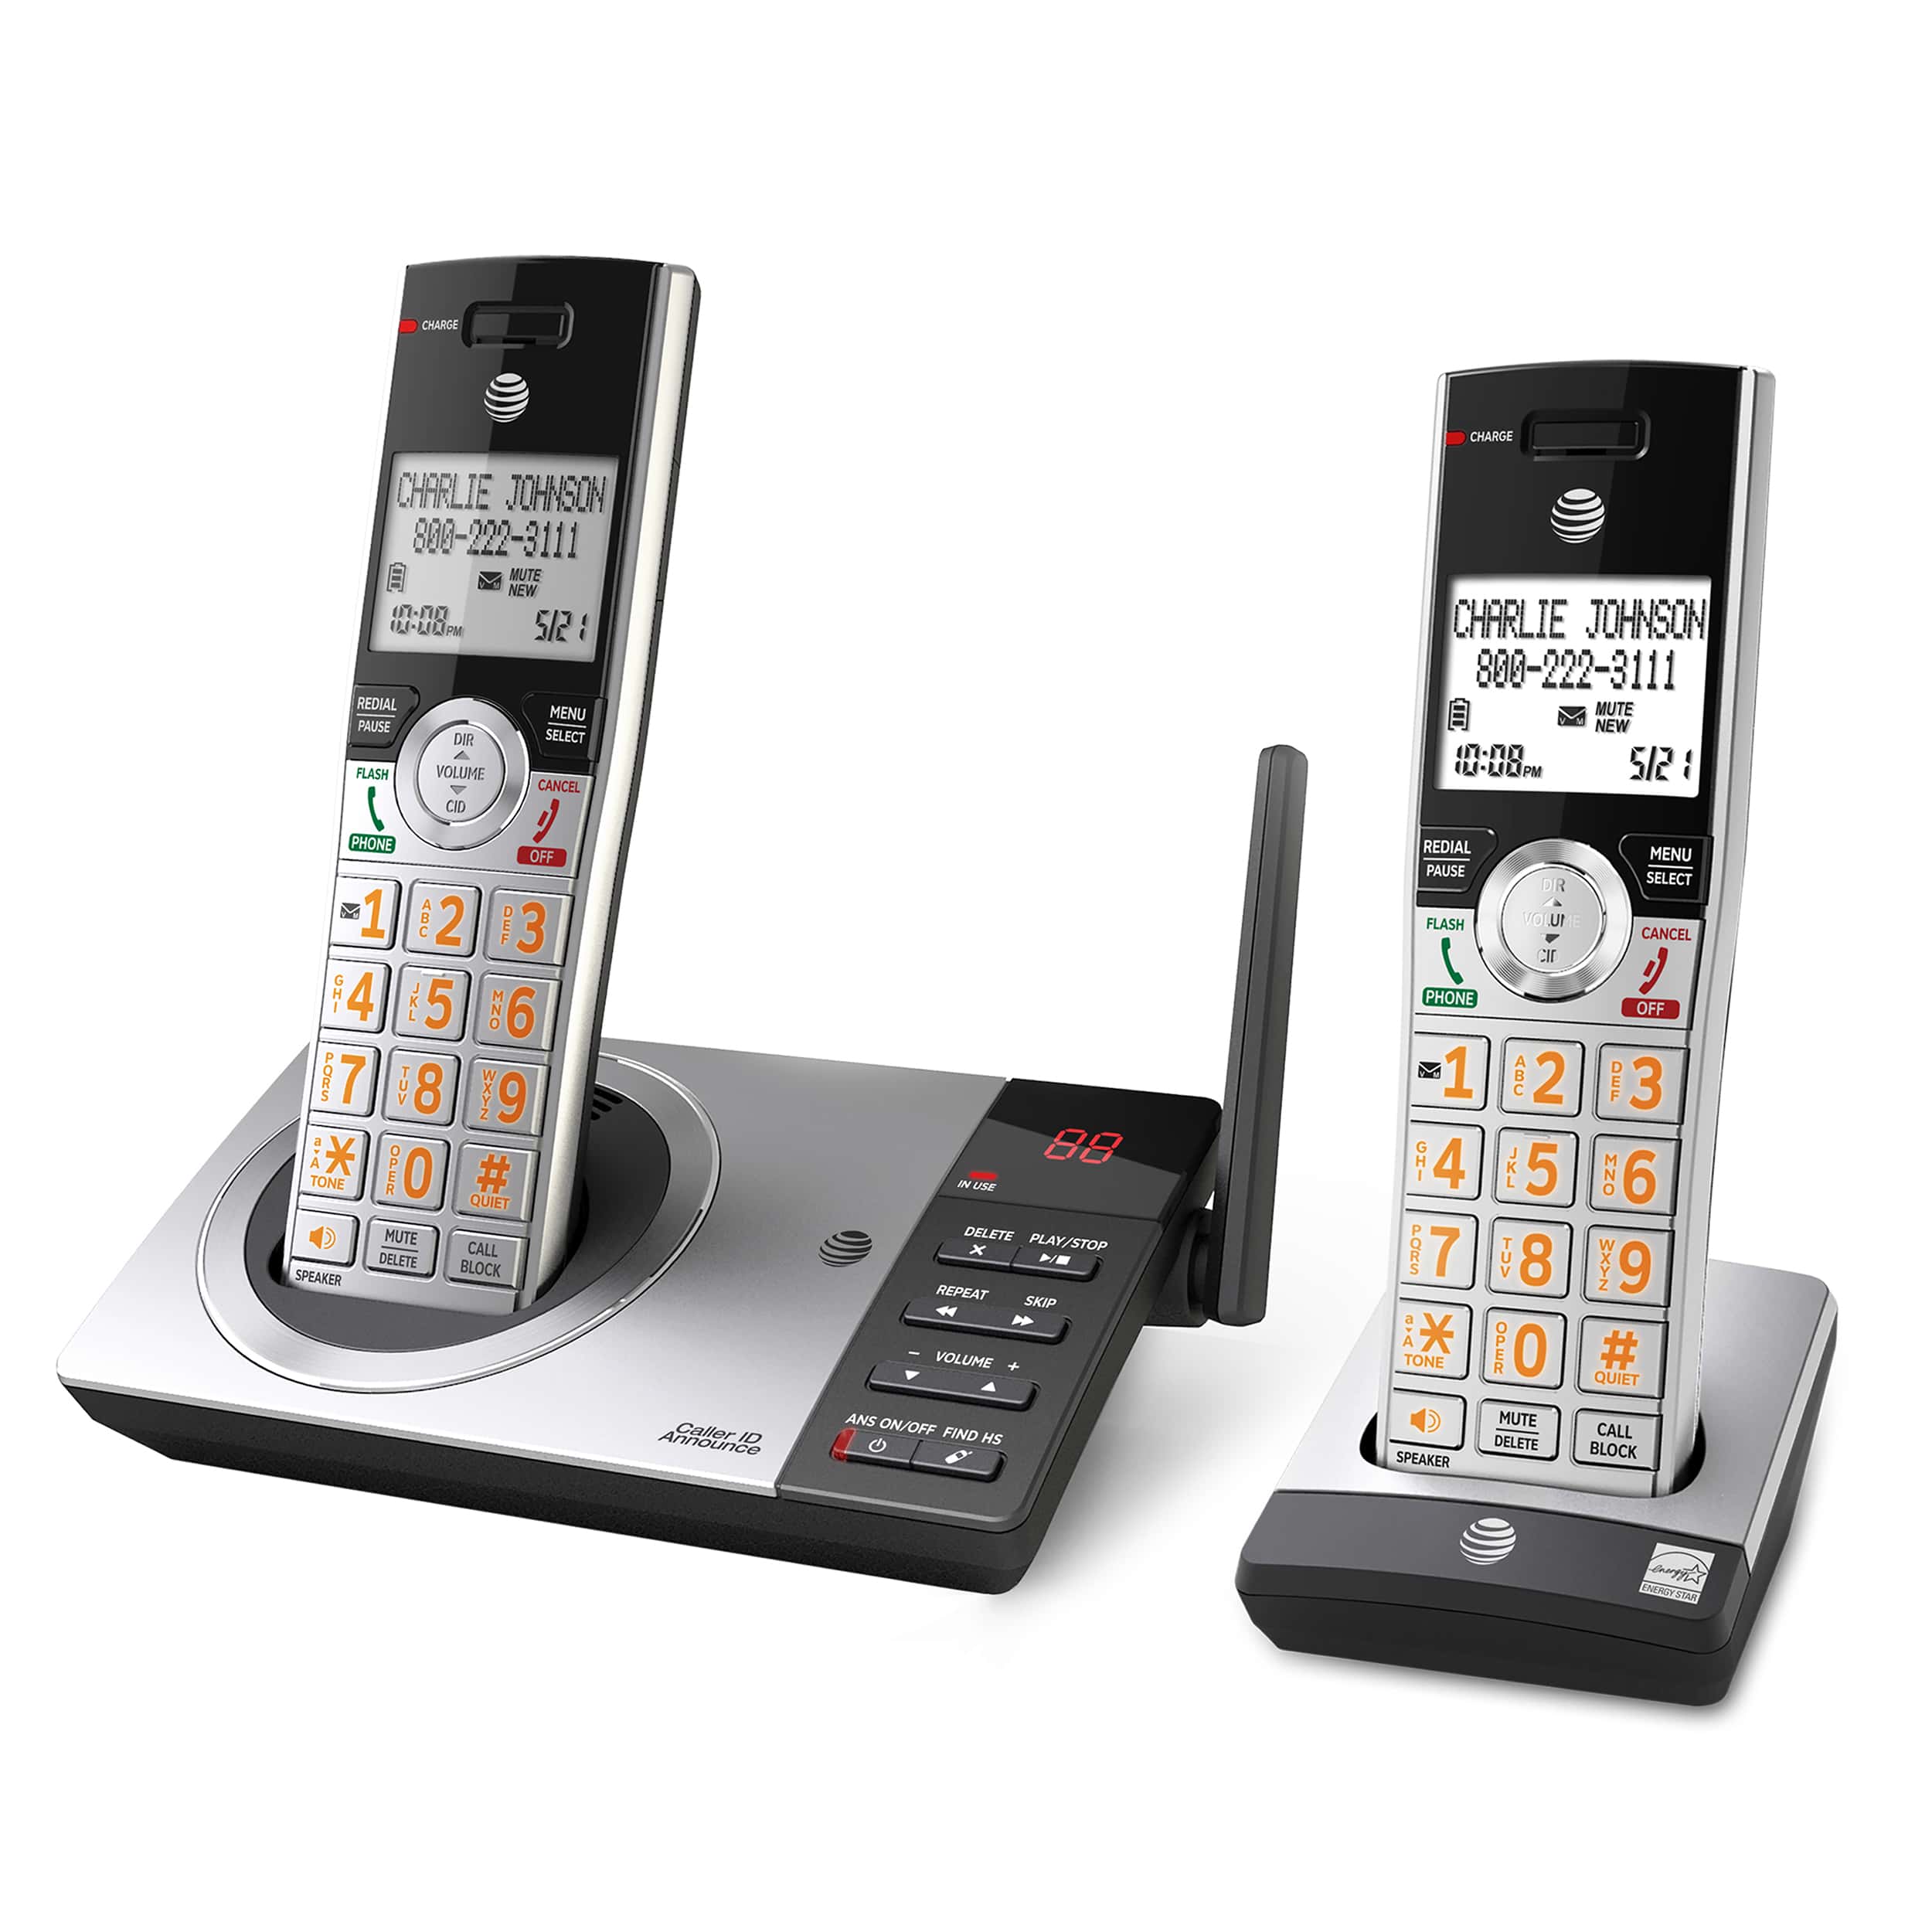 2 handset cordless answering system with smart call blocker - view 2